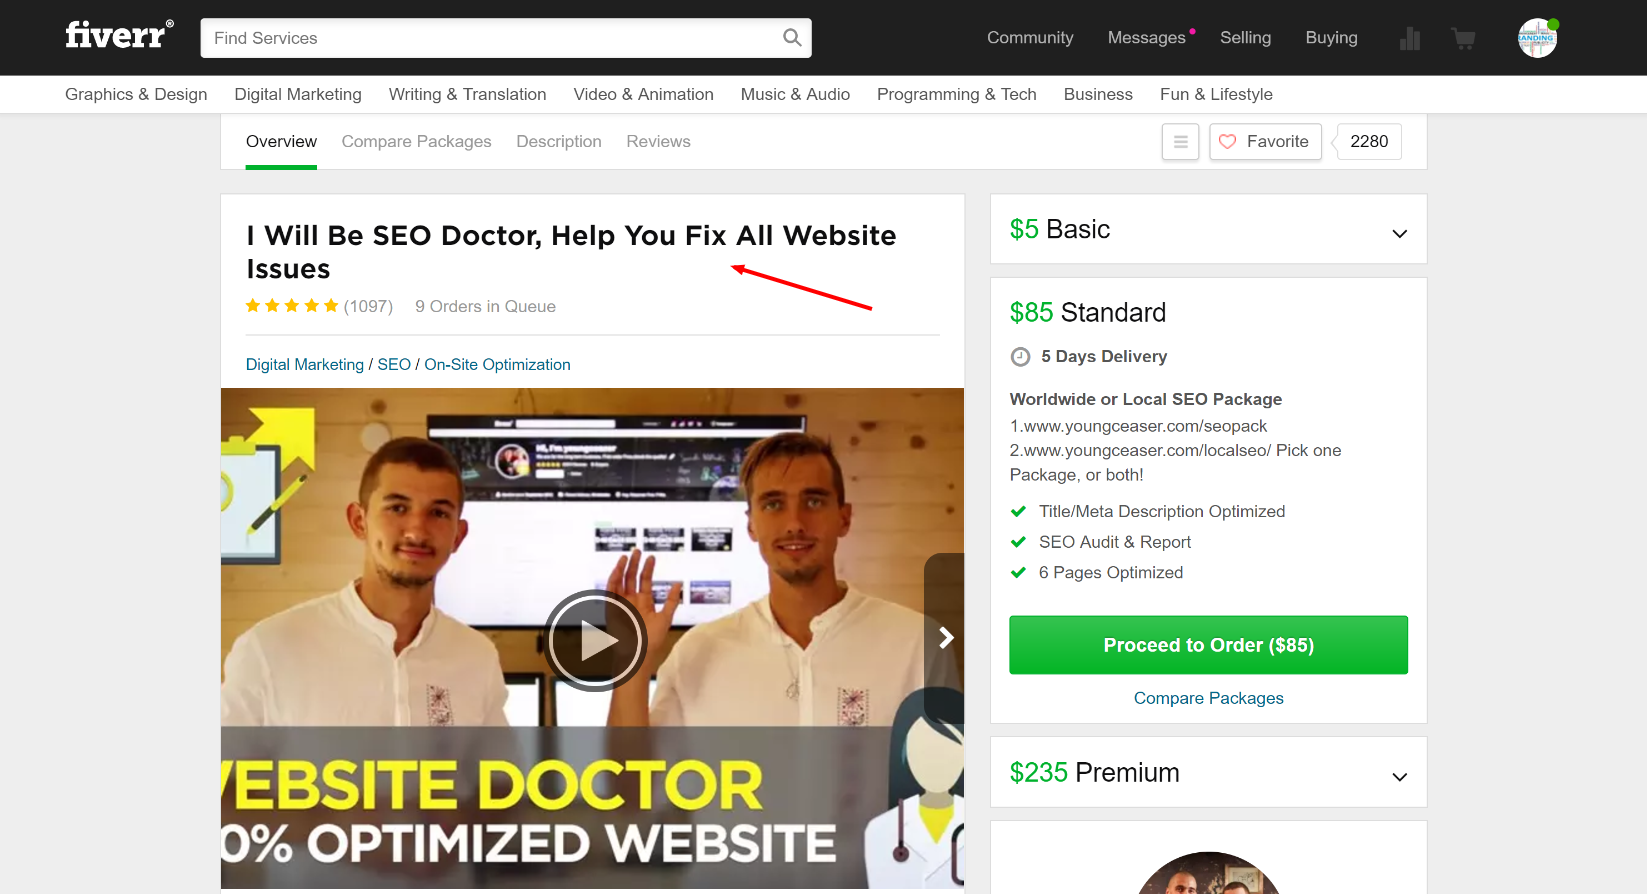 Seo doctor- How to Make Money With Fiverr